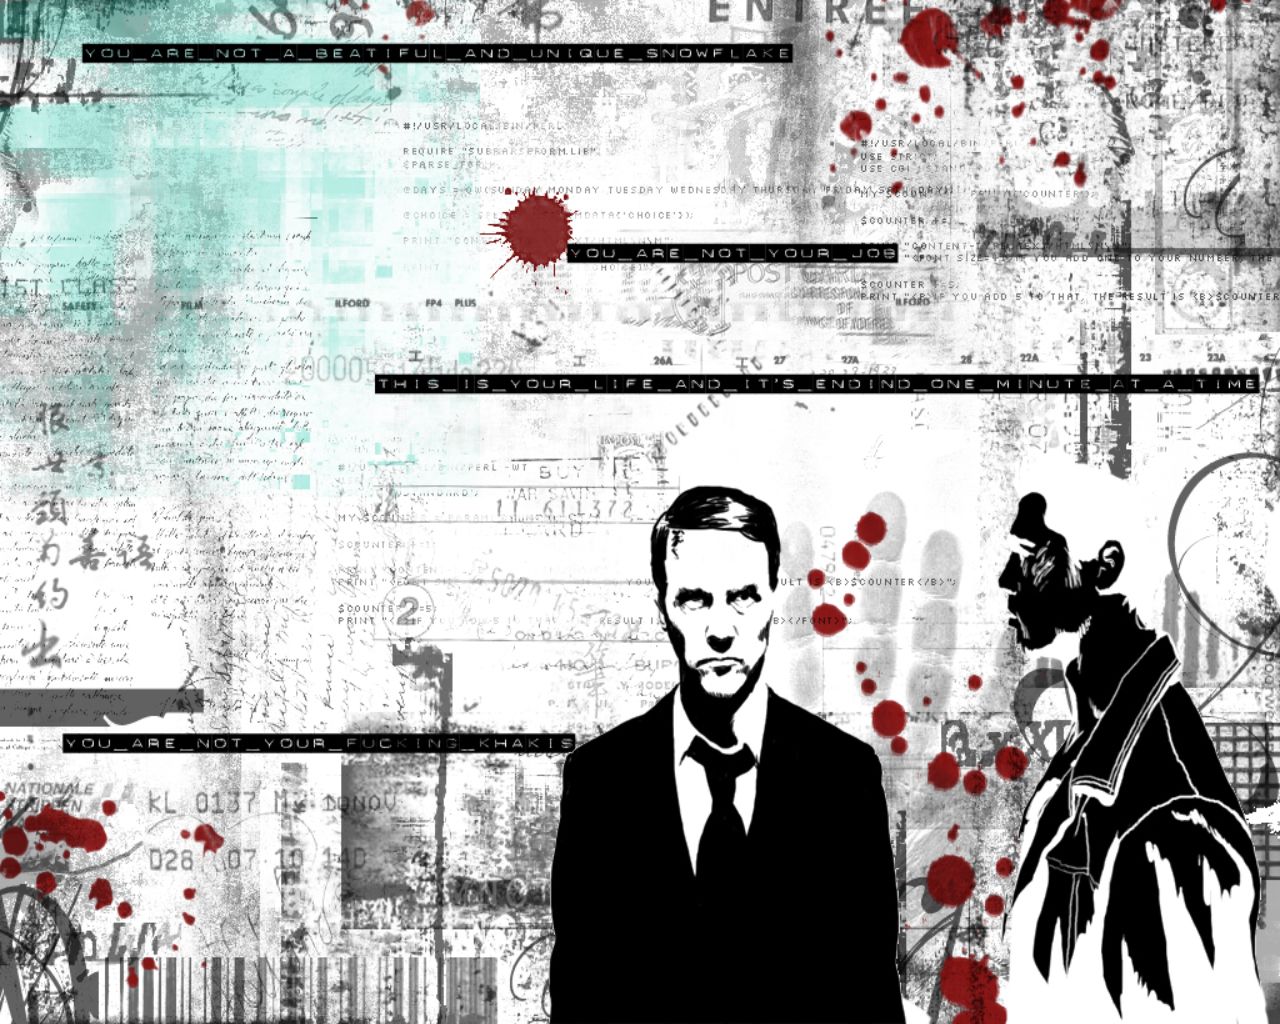 Fight Club Hintergrundbild 1280x1024. Fight Club wallpaper for desktop, download free Fight Club picture and background for PC